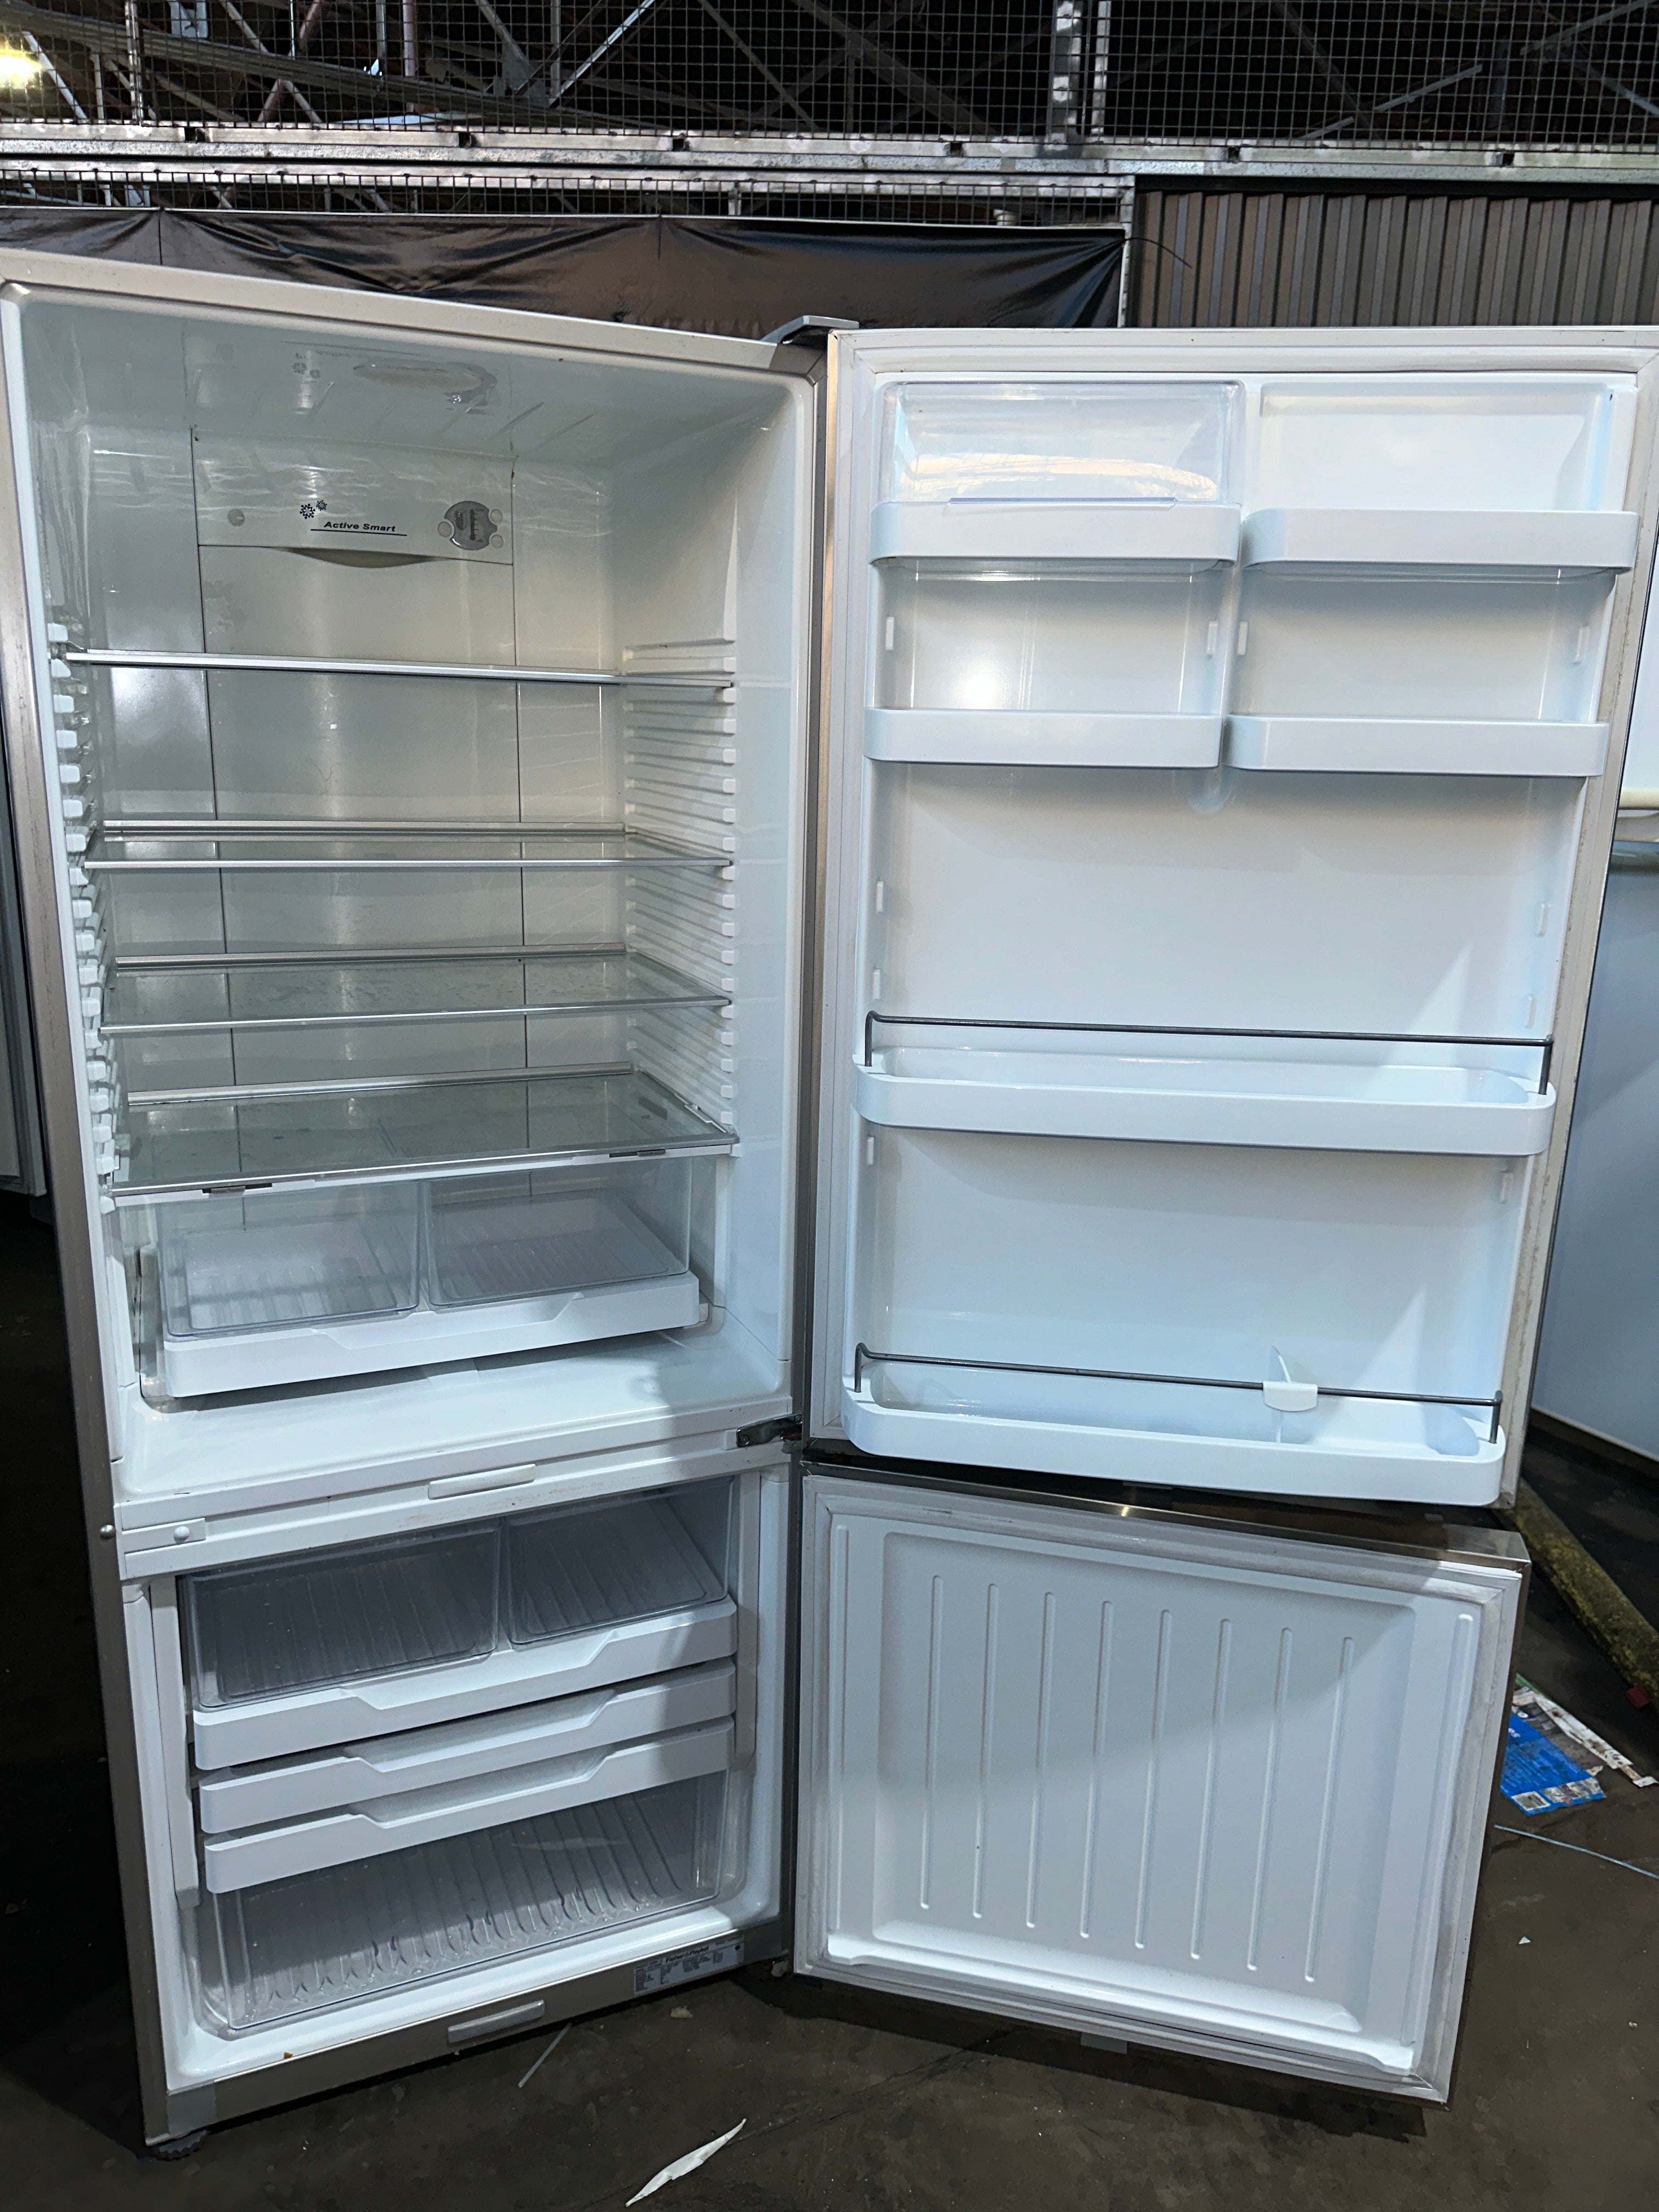 E442BRXFD Stainless 442 L Fisher & Paykel Bottom Mount Refrigerator - Sydney Appliances Outlet